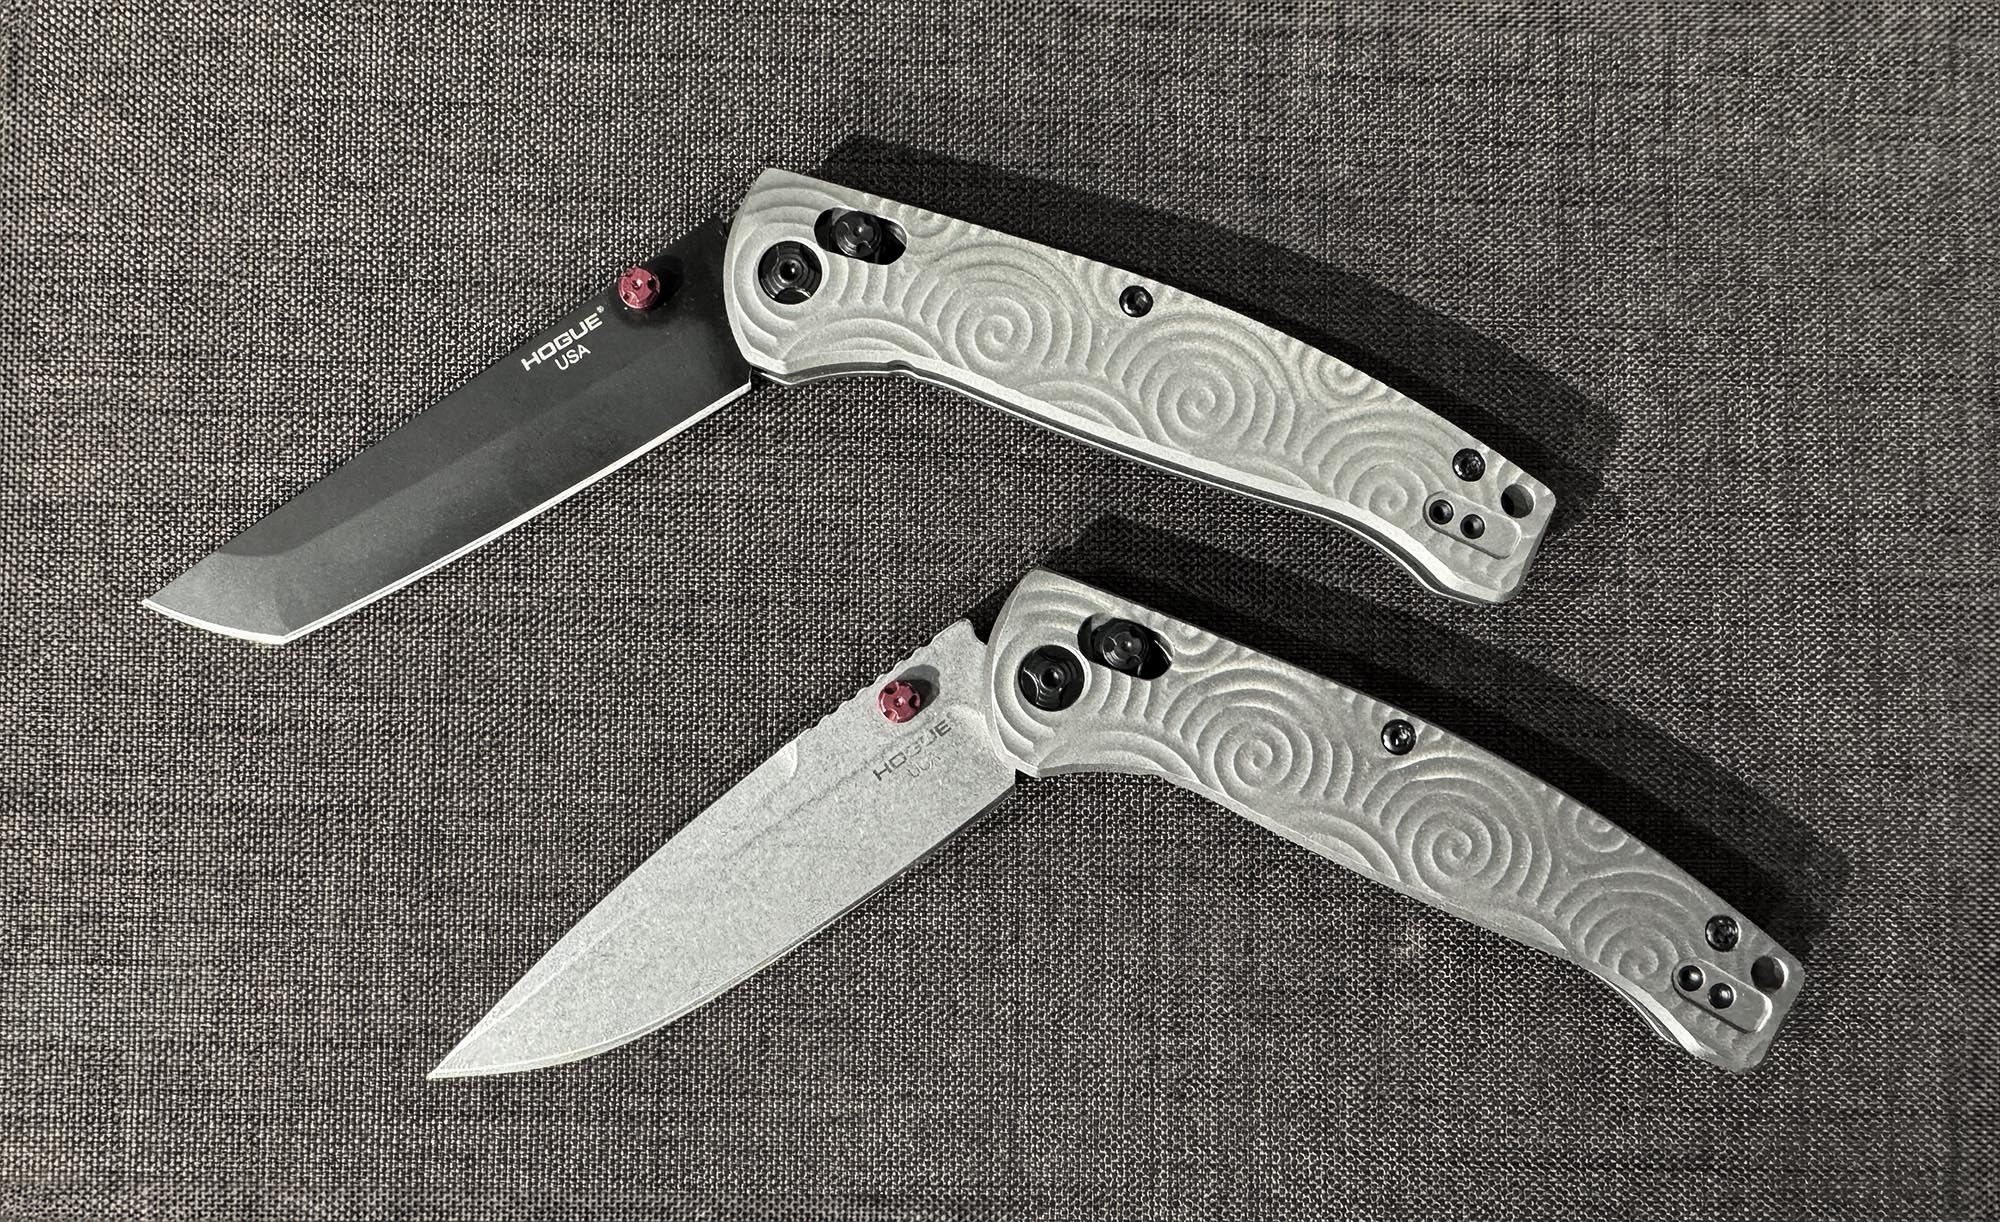 A pair of folding knives with a silver swirly handle and two different blades.